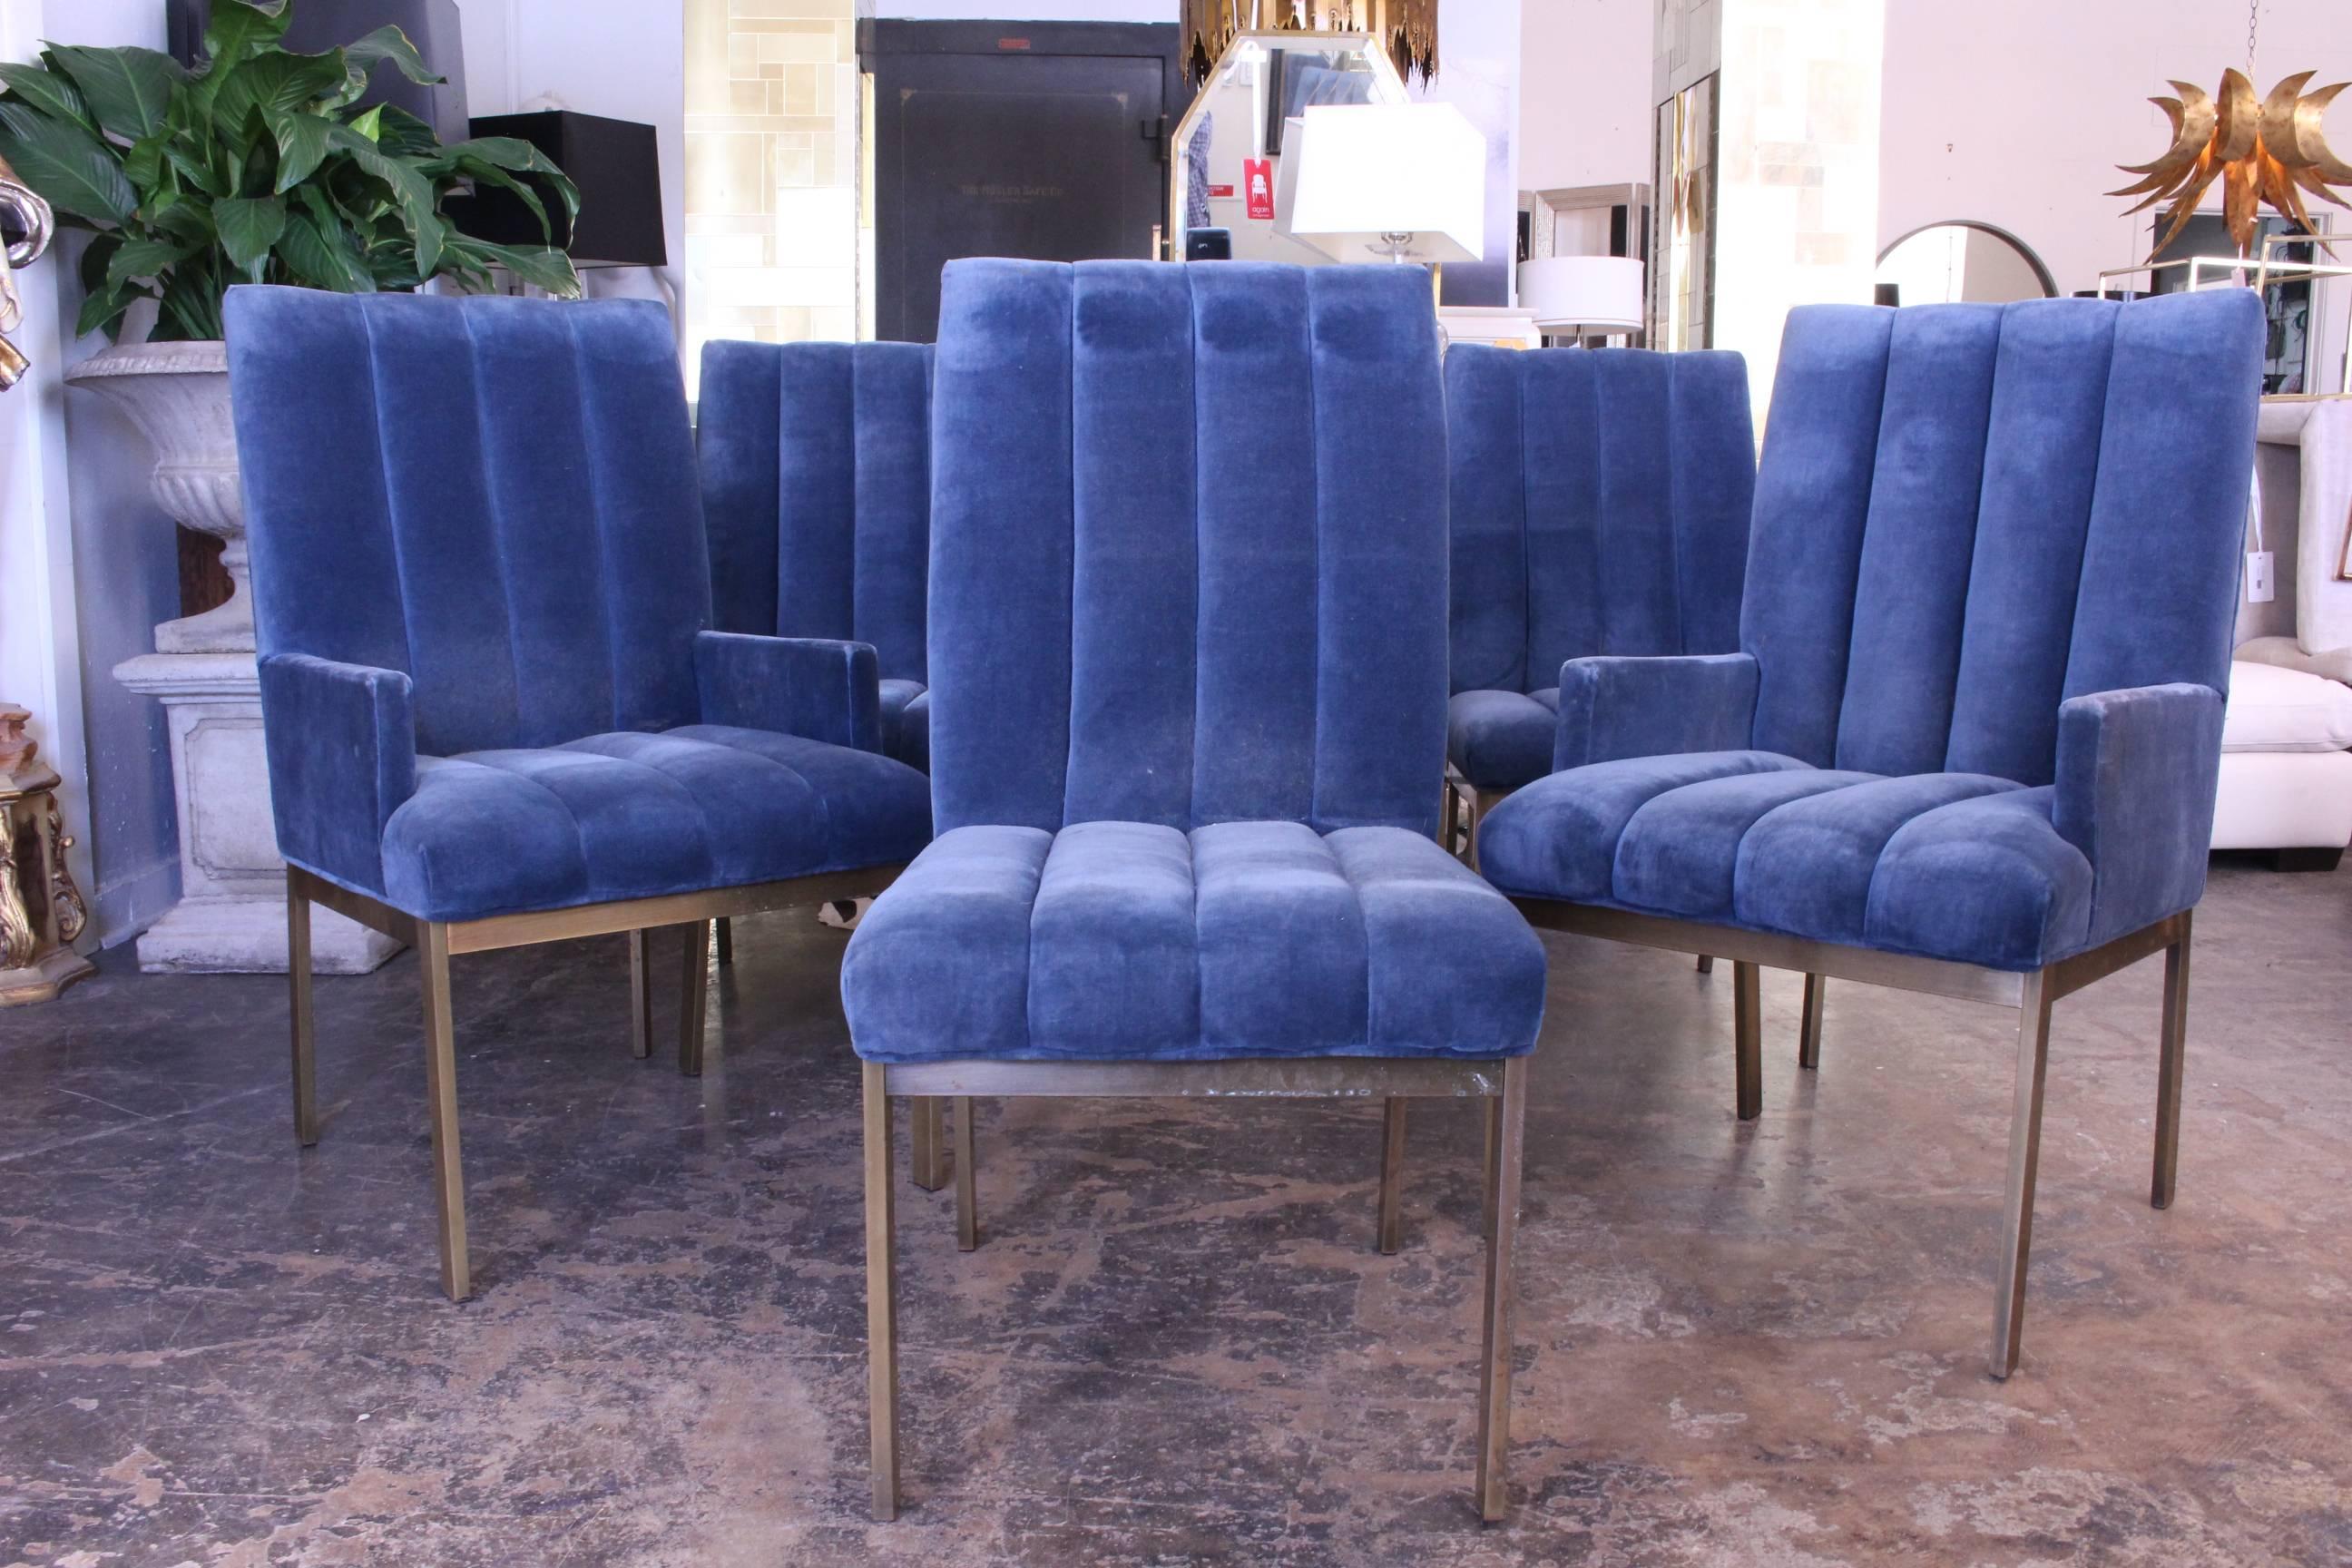 Set of six velvet dining chairs by DIA. There is patina on metal surface.

Dimensions: 22